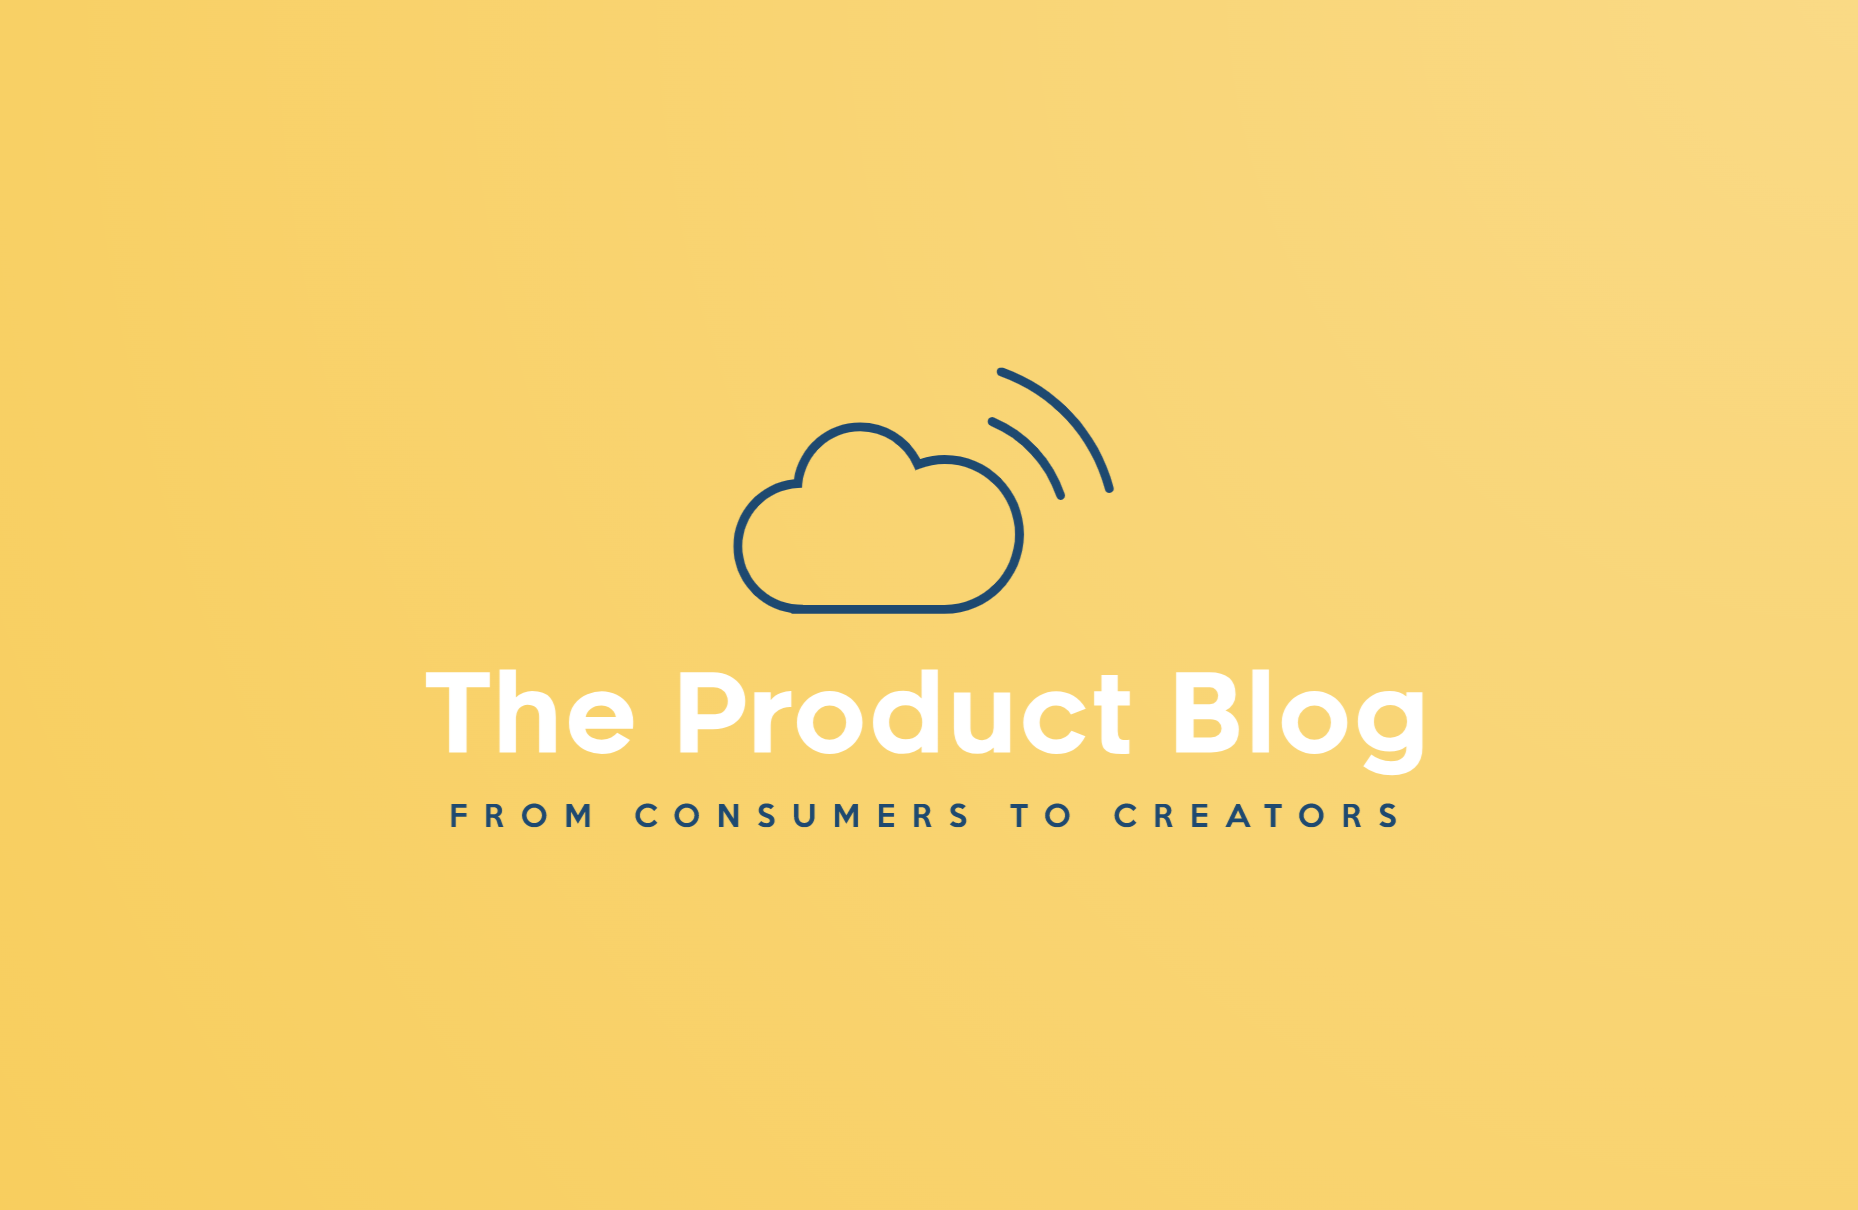 The foundation for building digital products